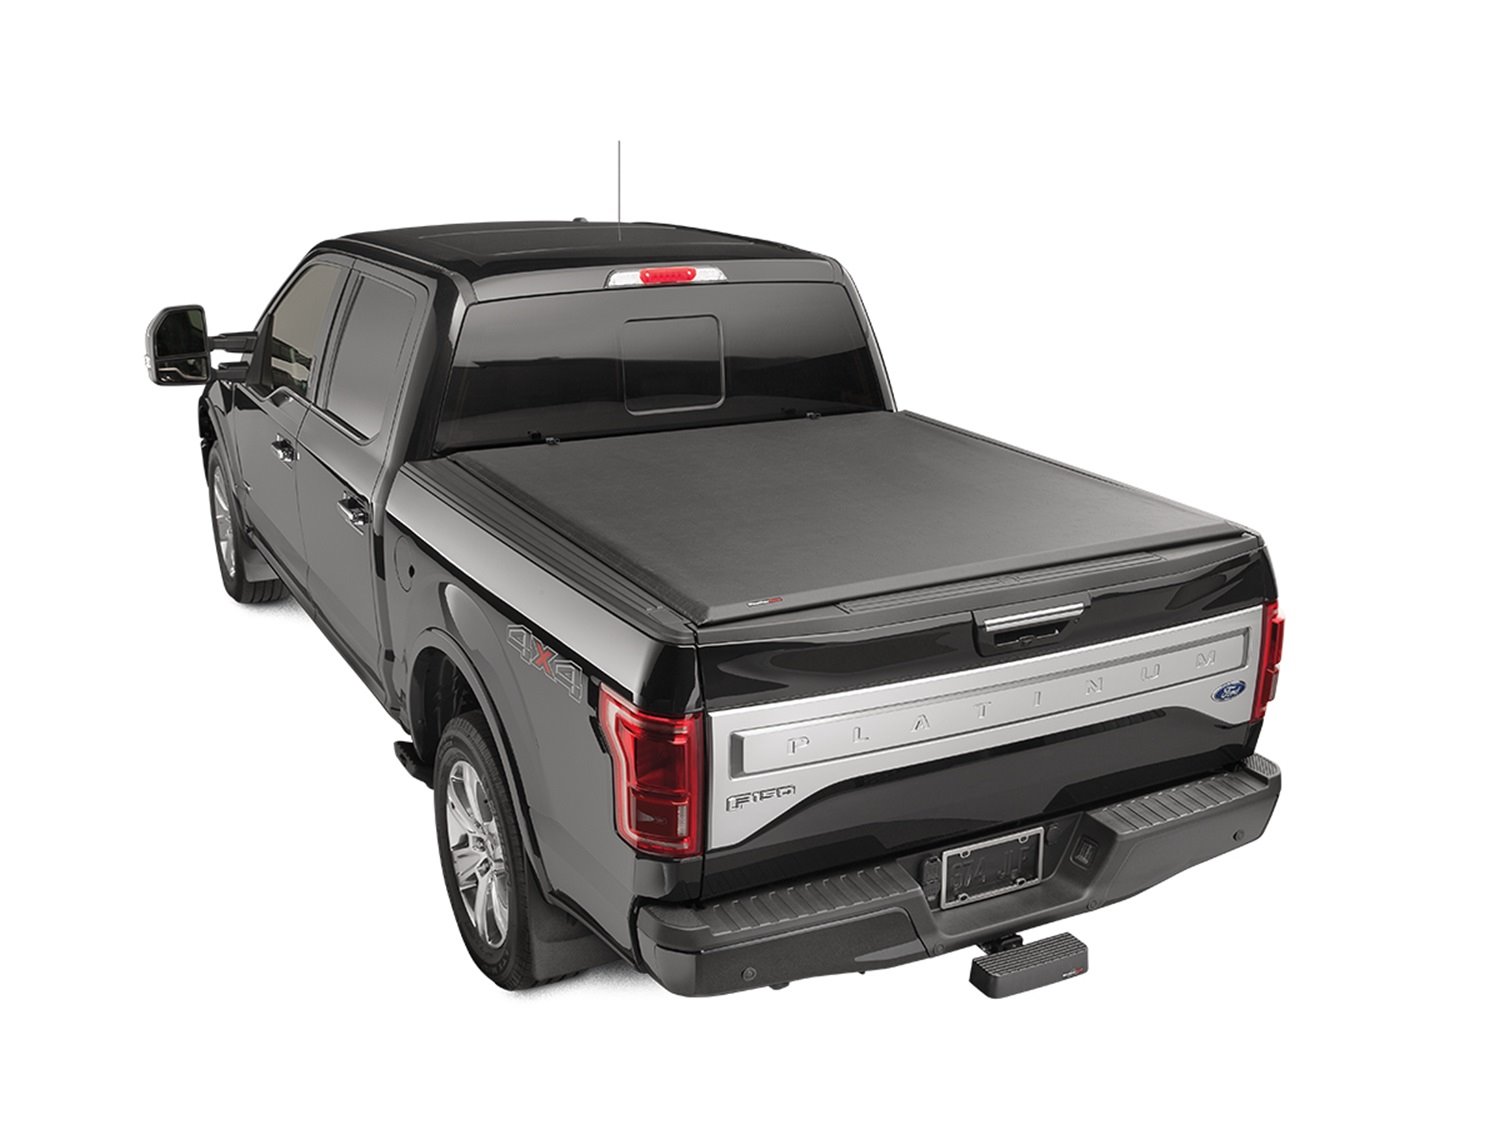 ROLL UP TRUCK BED COVER B CHEVROLET SILVERADO 2014-2017 NEW FULL SIZE 1500 5 8 BED